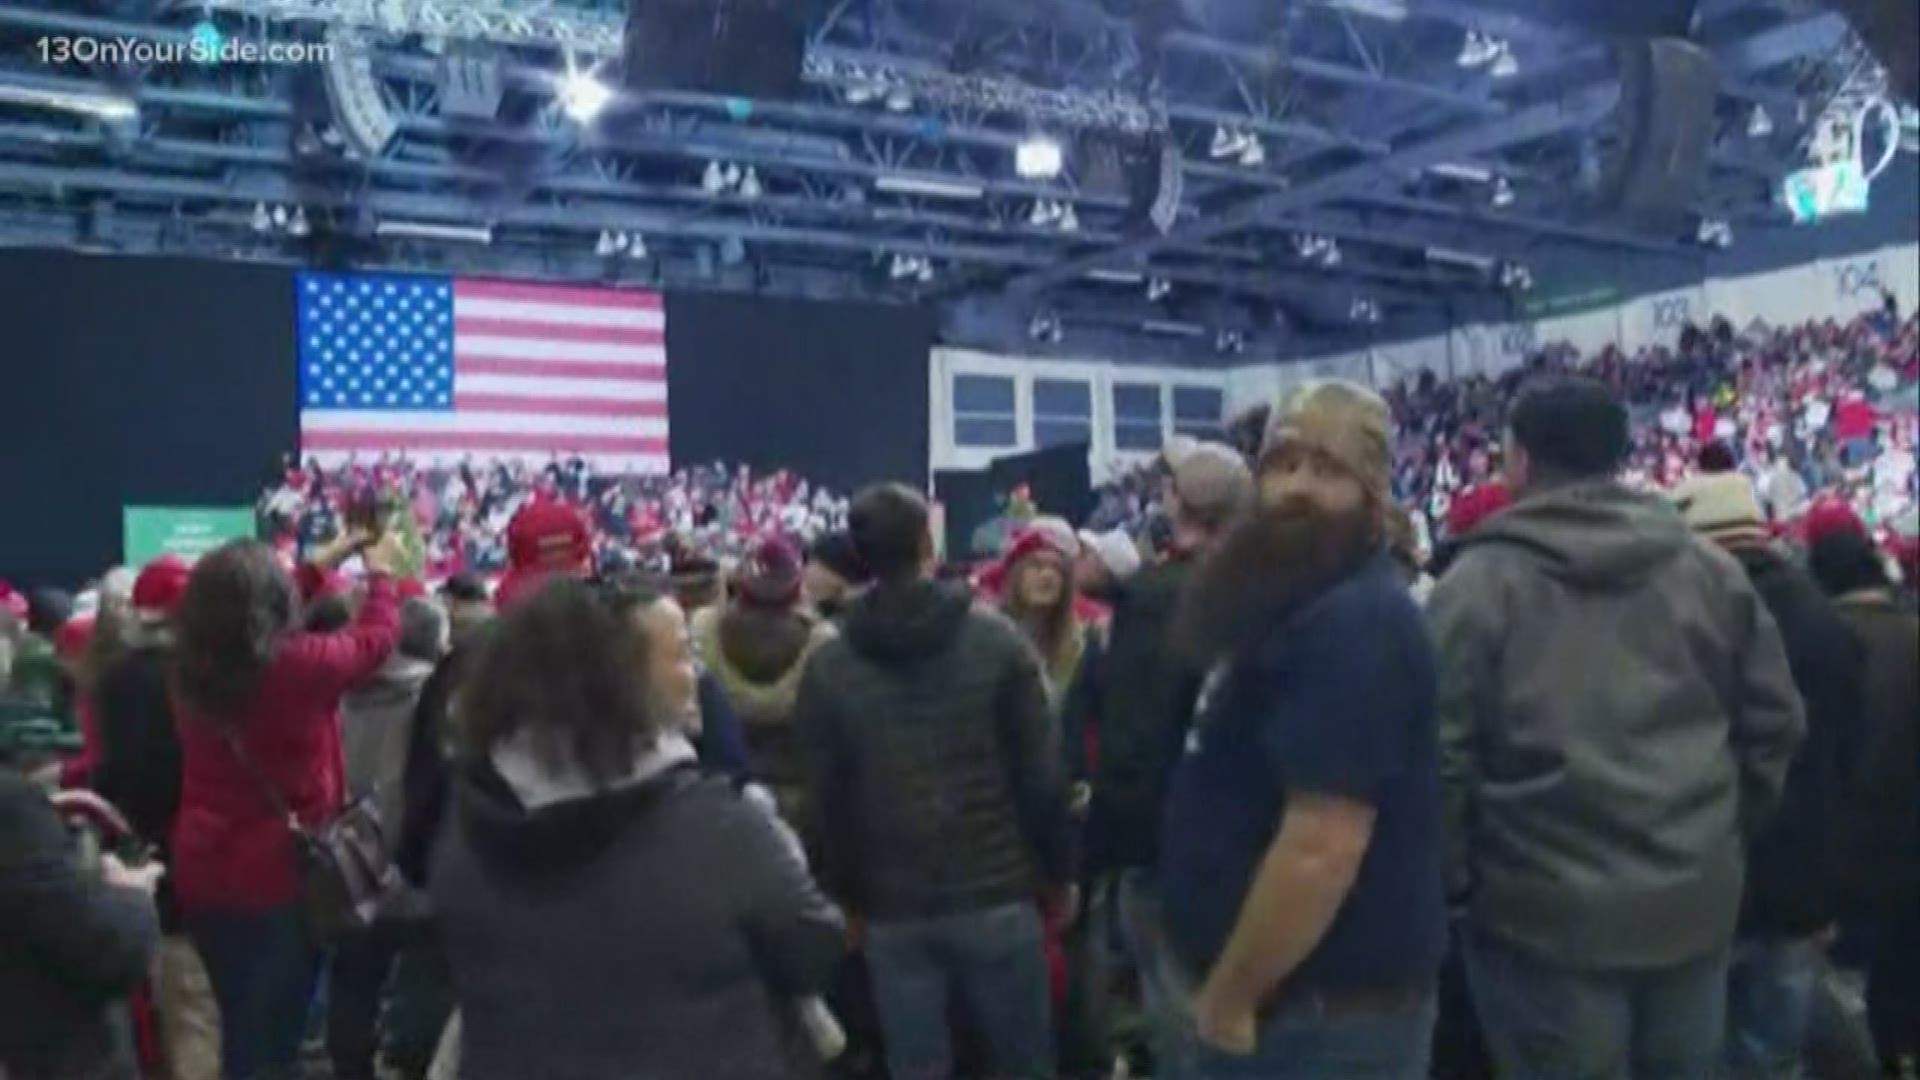 Both supporters and protestors are waiting for President Trump to arrive in Battle Creek for his Merry Christmas rally.